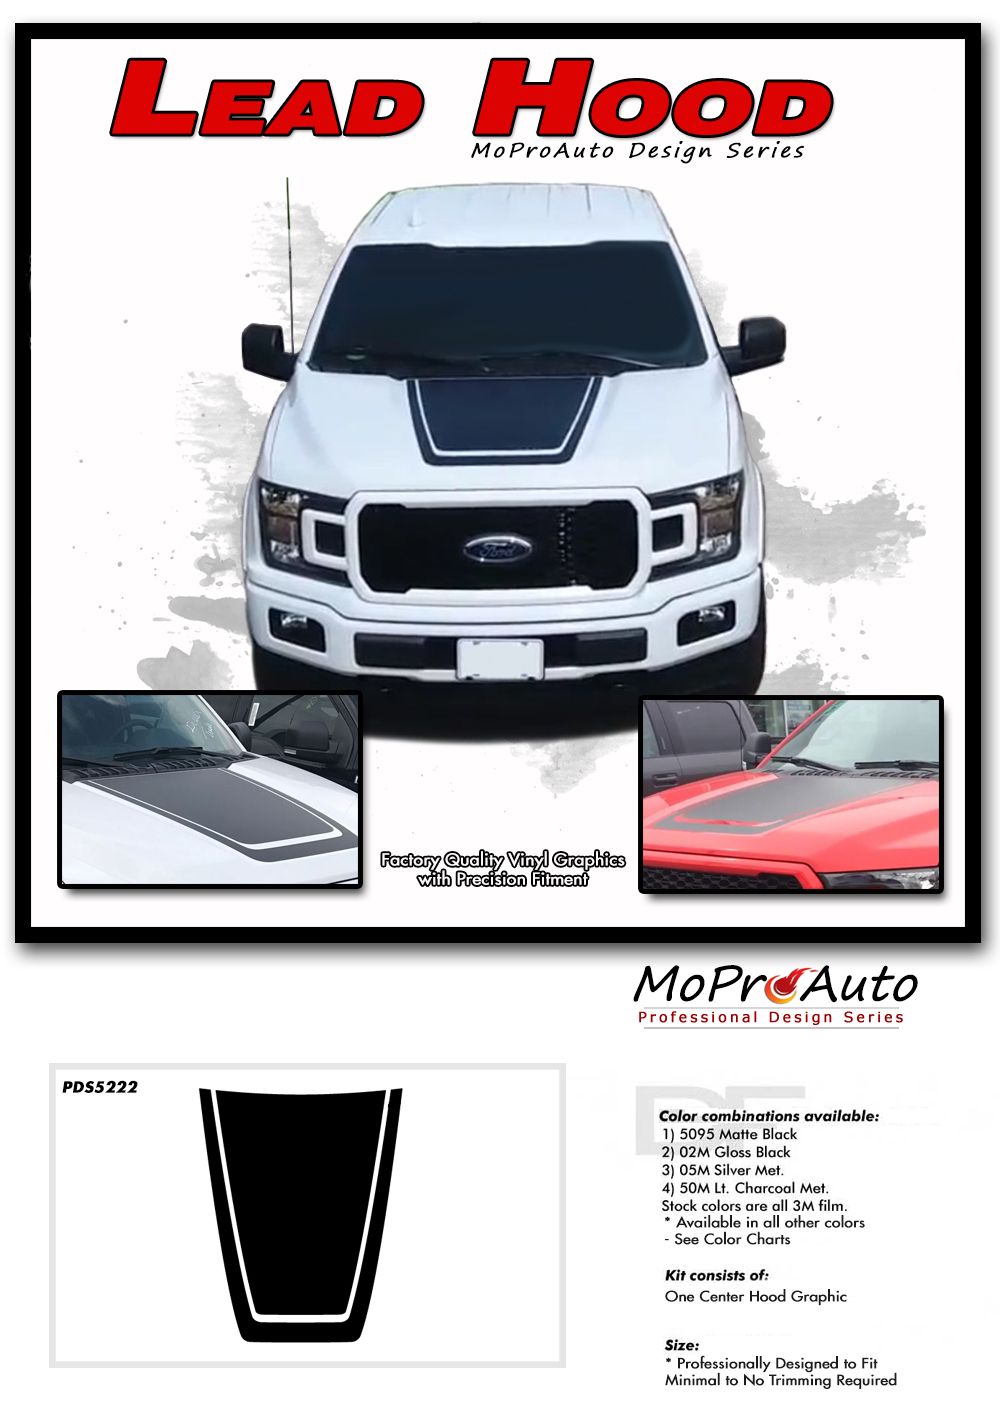 LEAD HOOD FORD F-SERIES F-150 - MoProAuto Pro Design Series Vinyl Graphics and Decals Kit